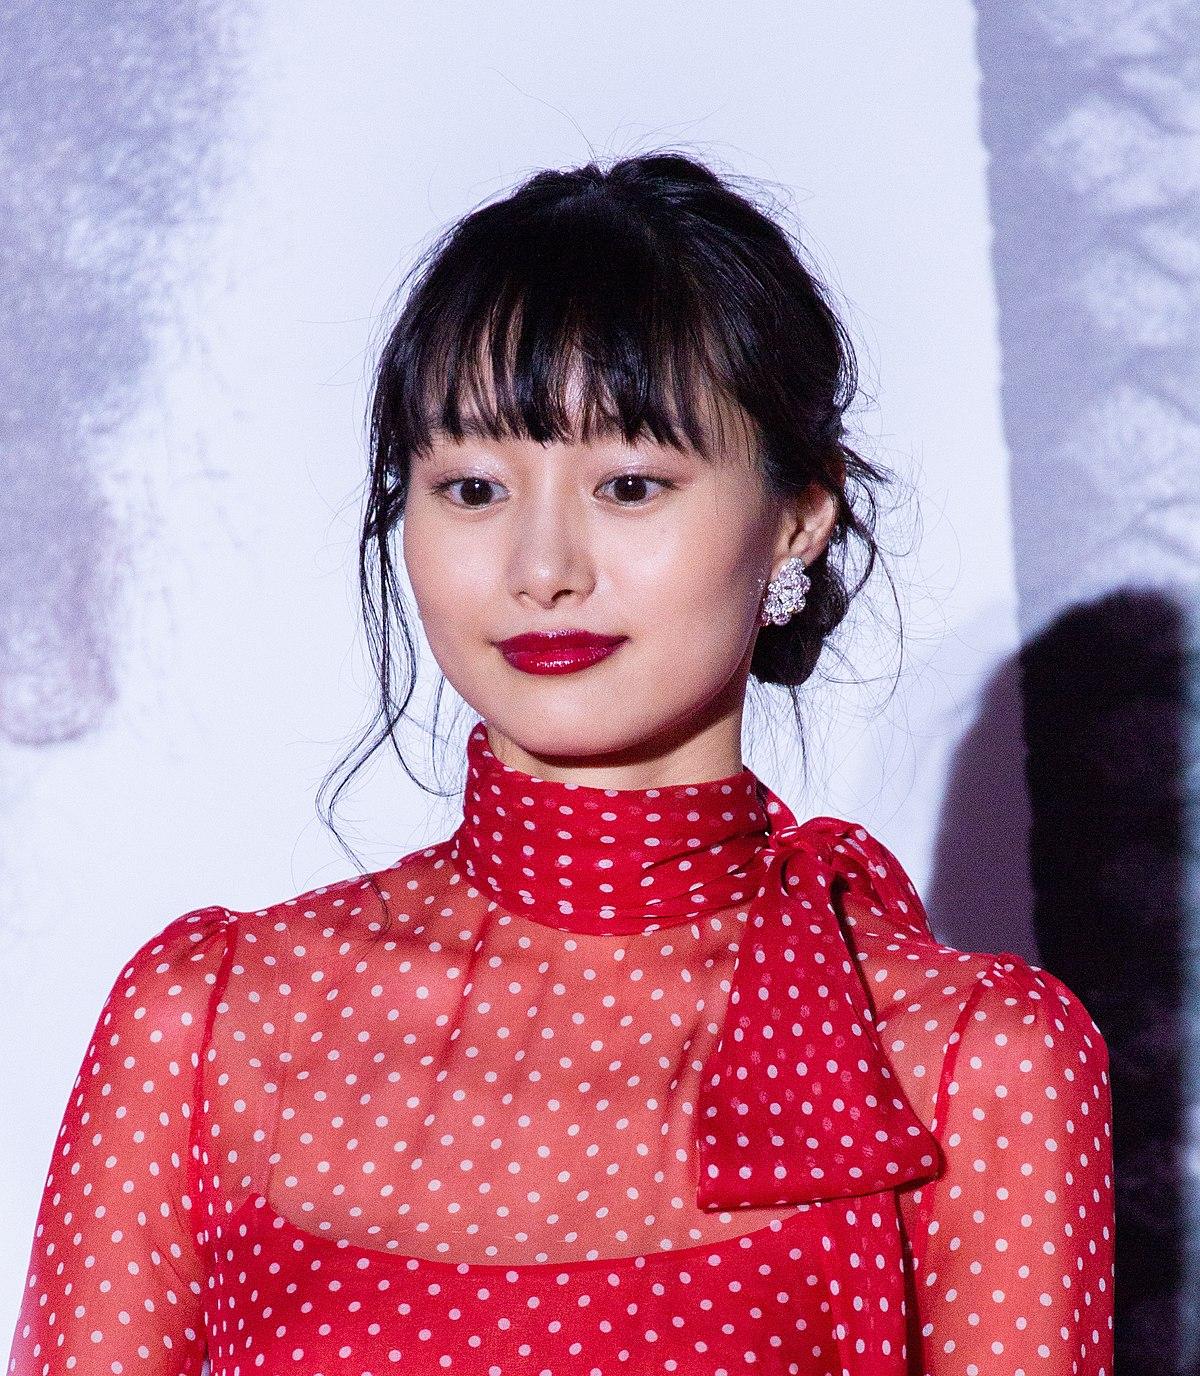 20+ Hot Pictures Of Yukio a.k.a Shiori Kutsuna From Deadpool 2 With Interesting Facts About Her 353